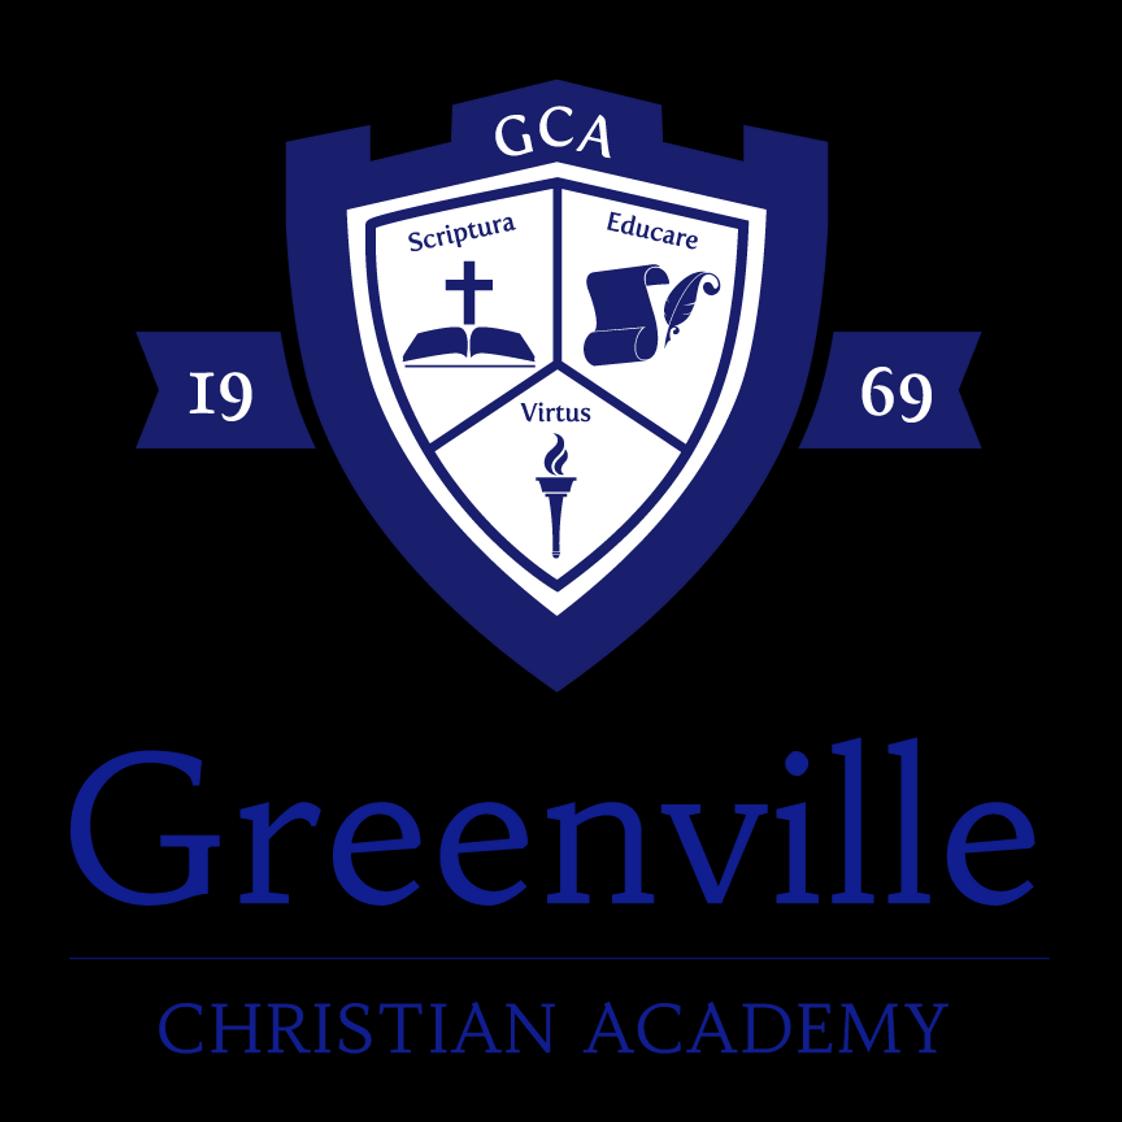 Greenville Christian Academy Photo #1 - GCA seeks to educate in Biblical truth and righteousness, to prepare students to be life-long learners by pursuing excellence, and to distinctively operate as a Christian school.